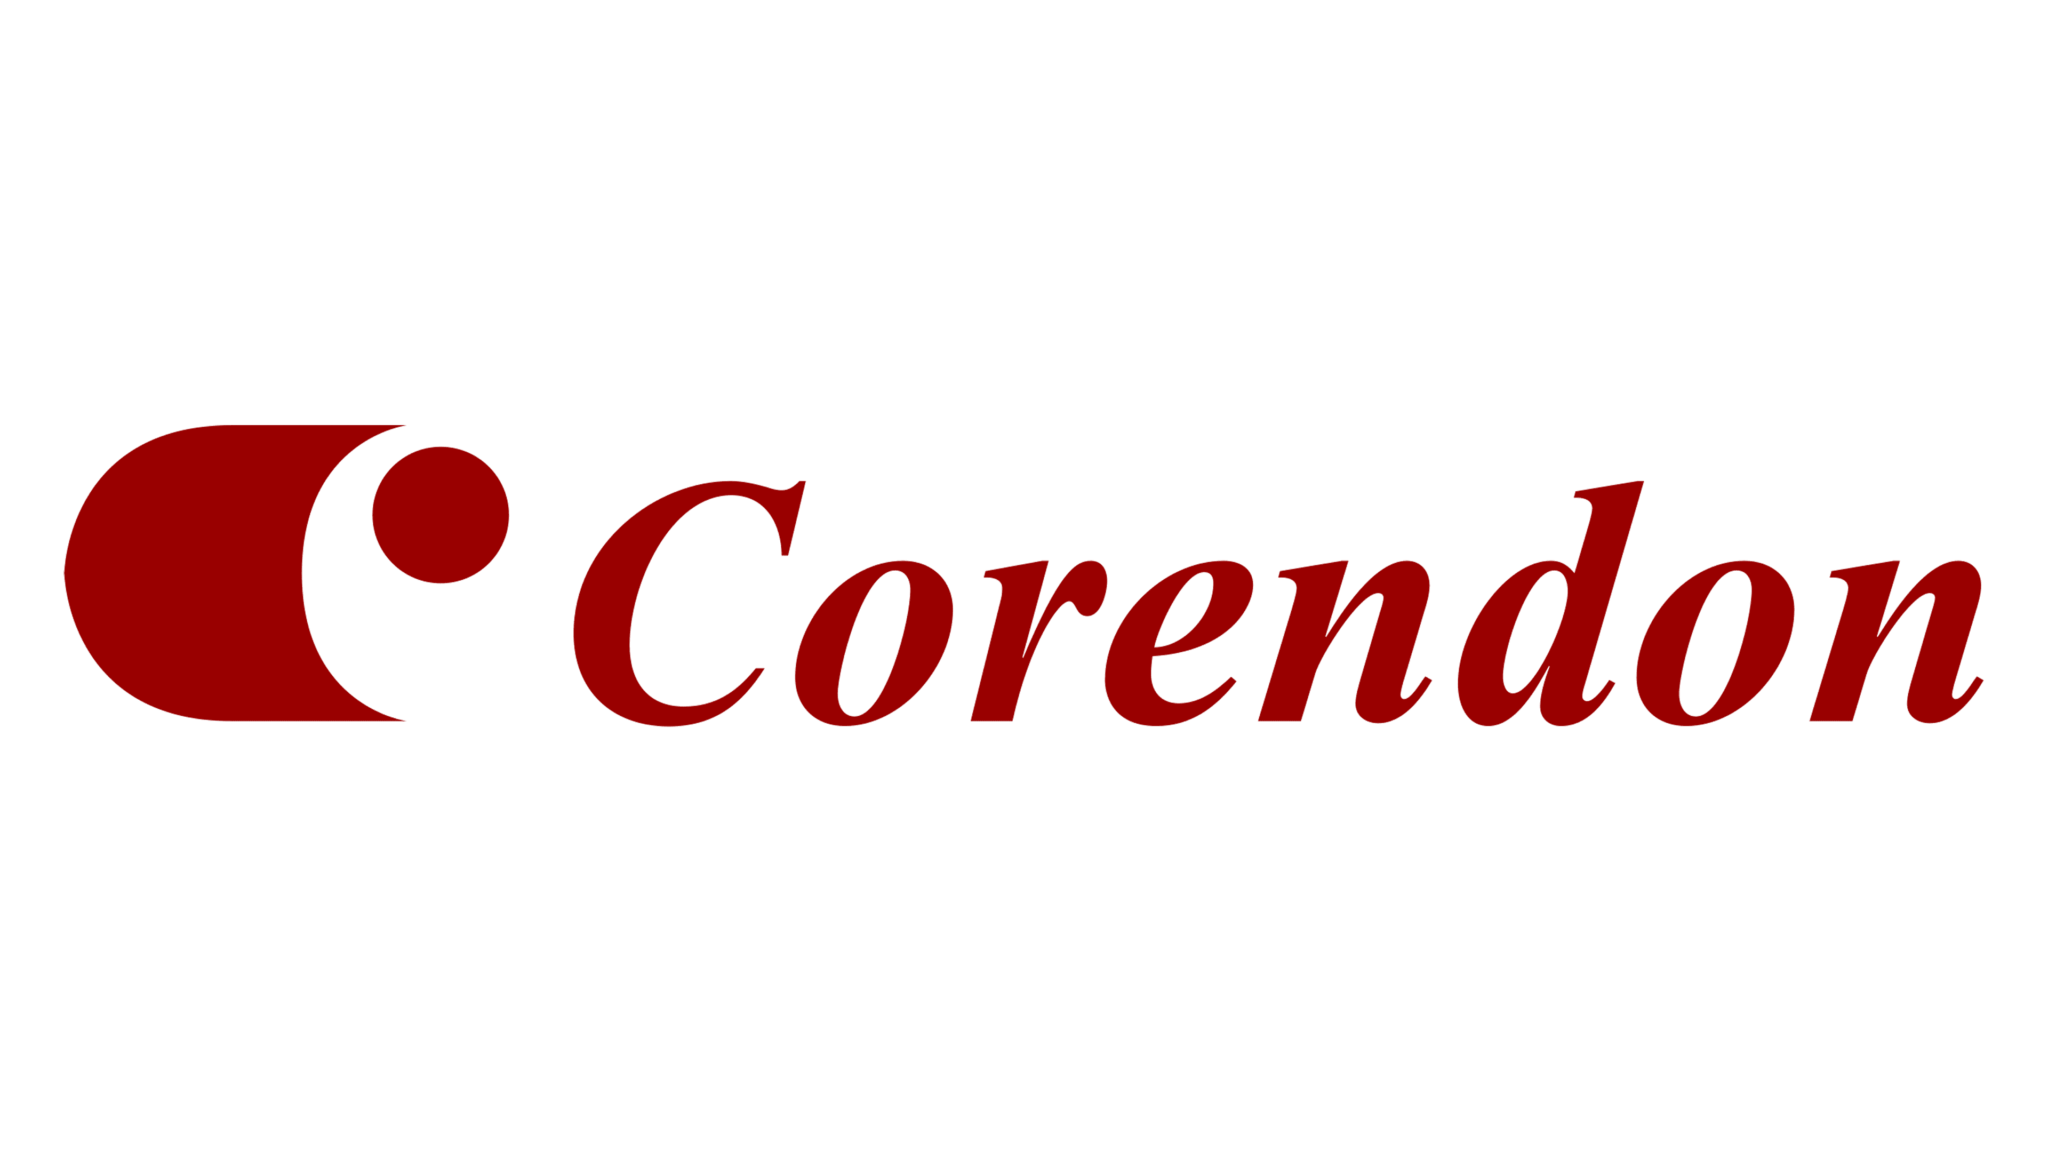 Corendon Airlines Logo and symbol, meaning, history, PNG, brand